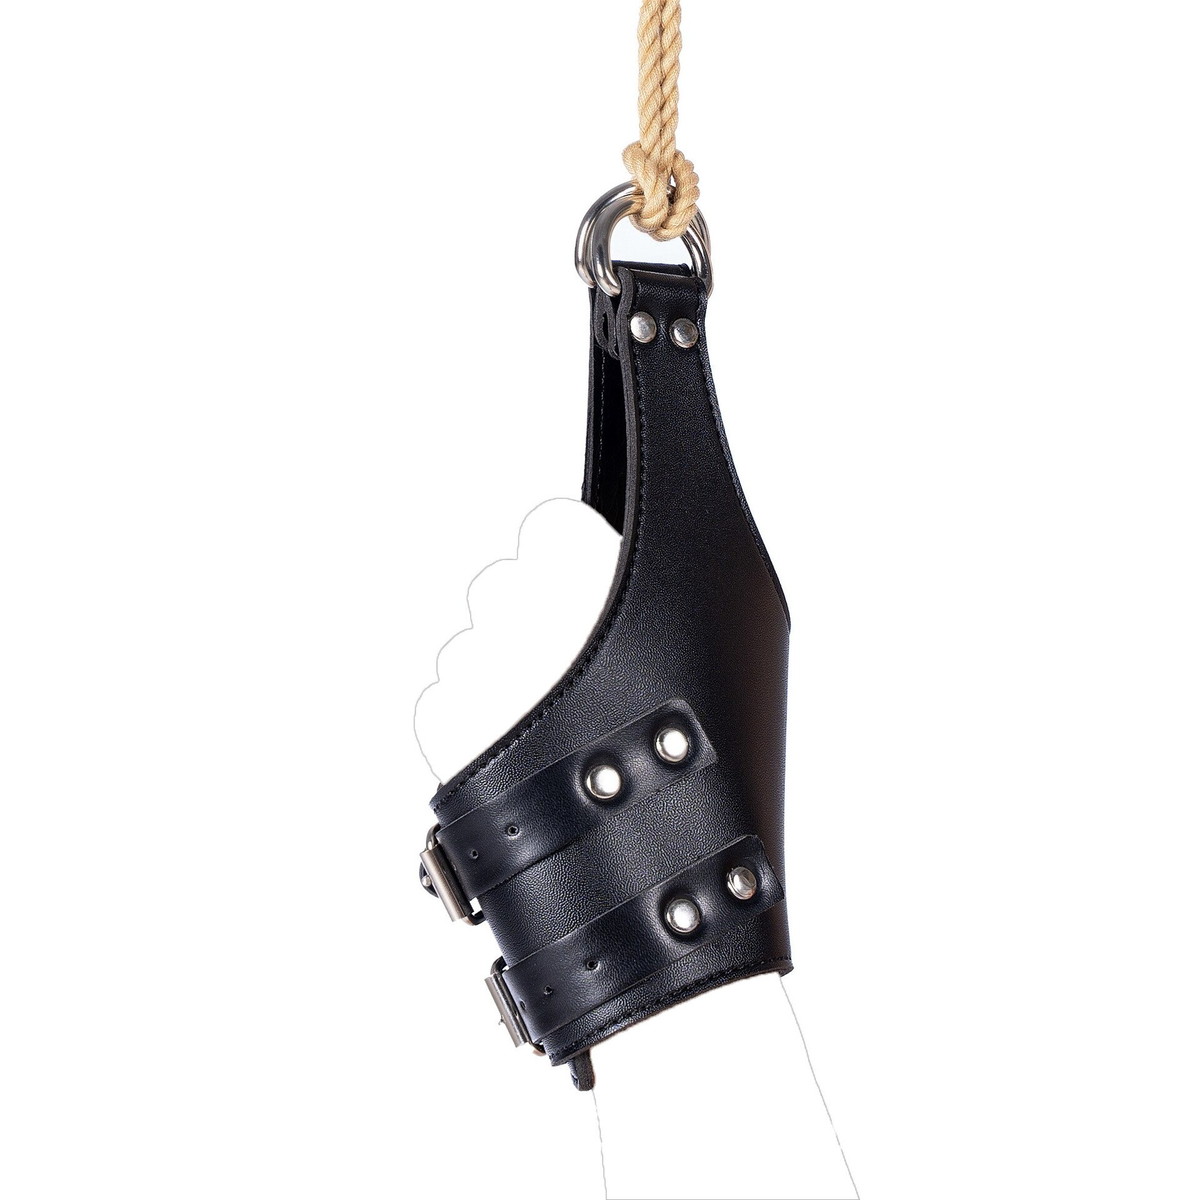 PU Leather Adult Gloves for Sex Games / BDSM Soft Handcuffs / Erotic Toys for Sex - EVE's SECRETS